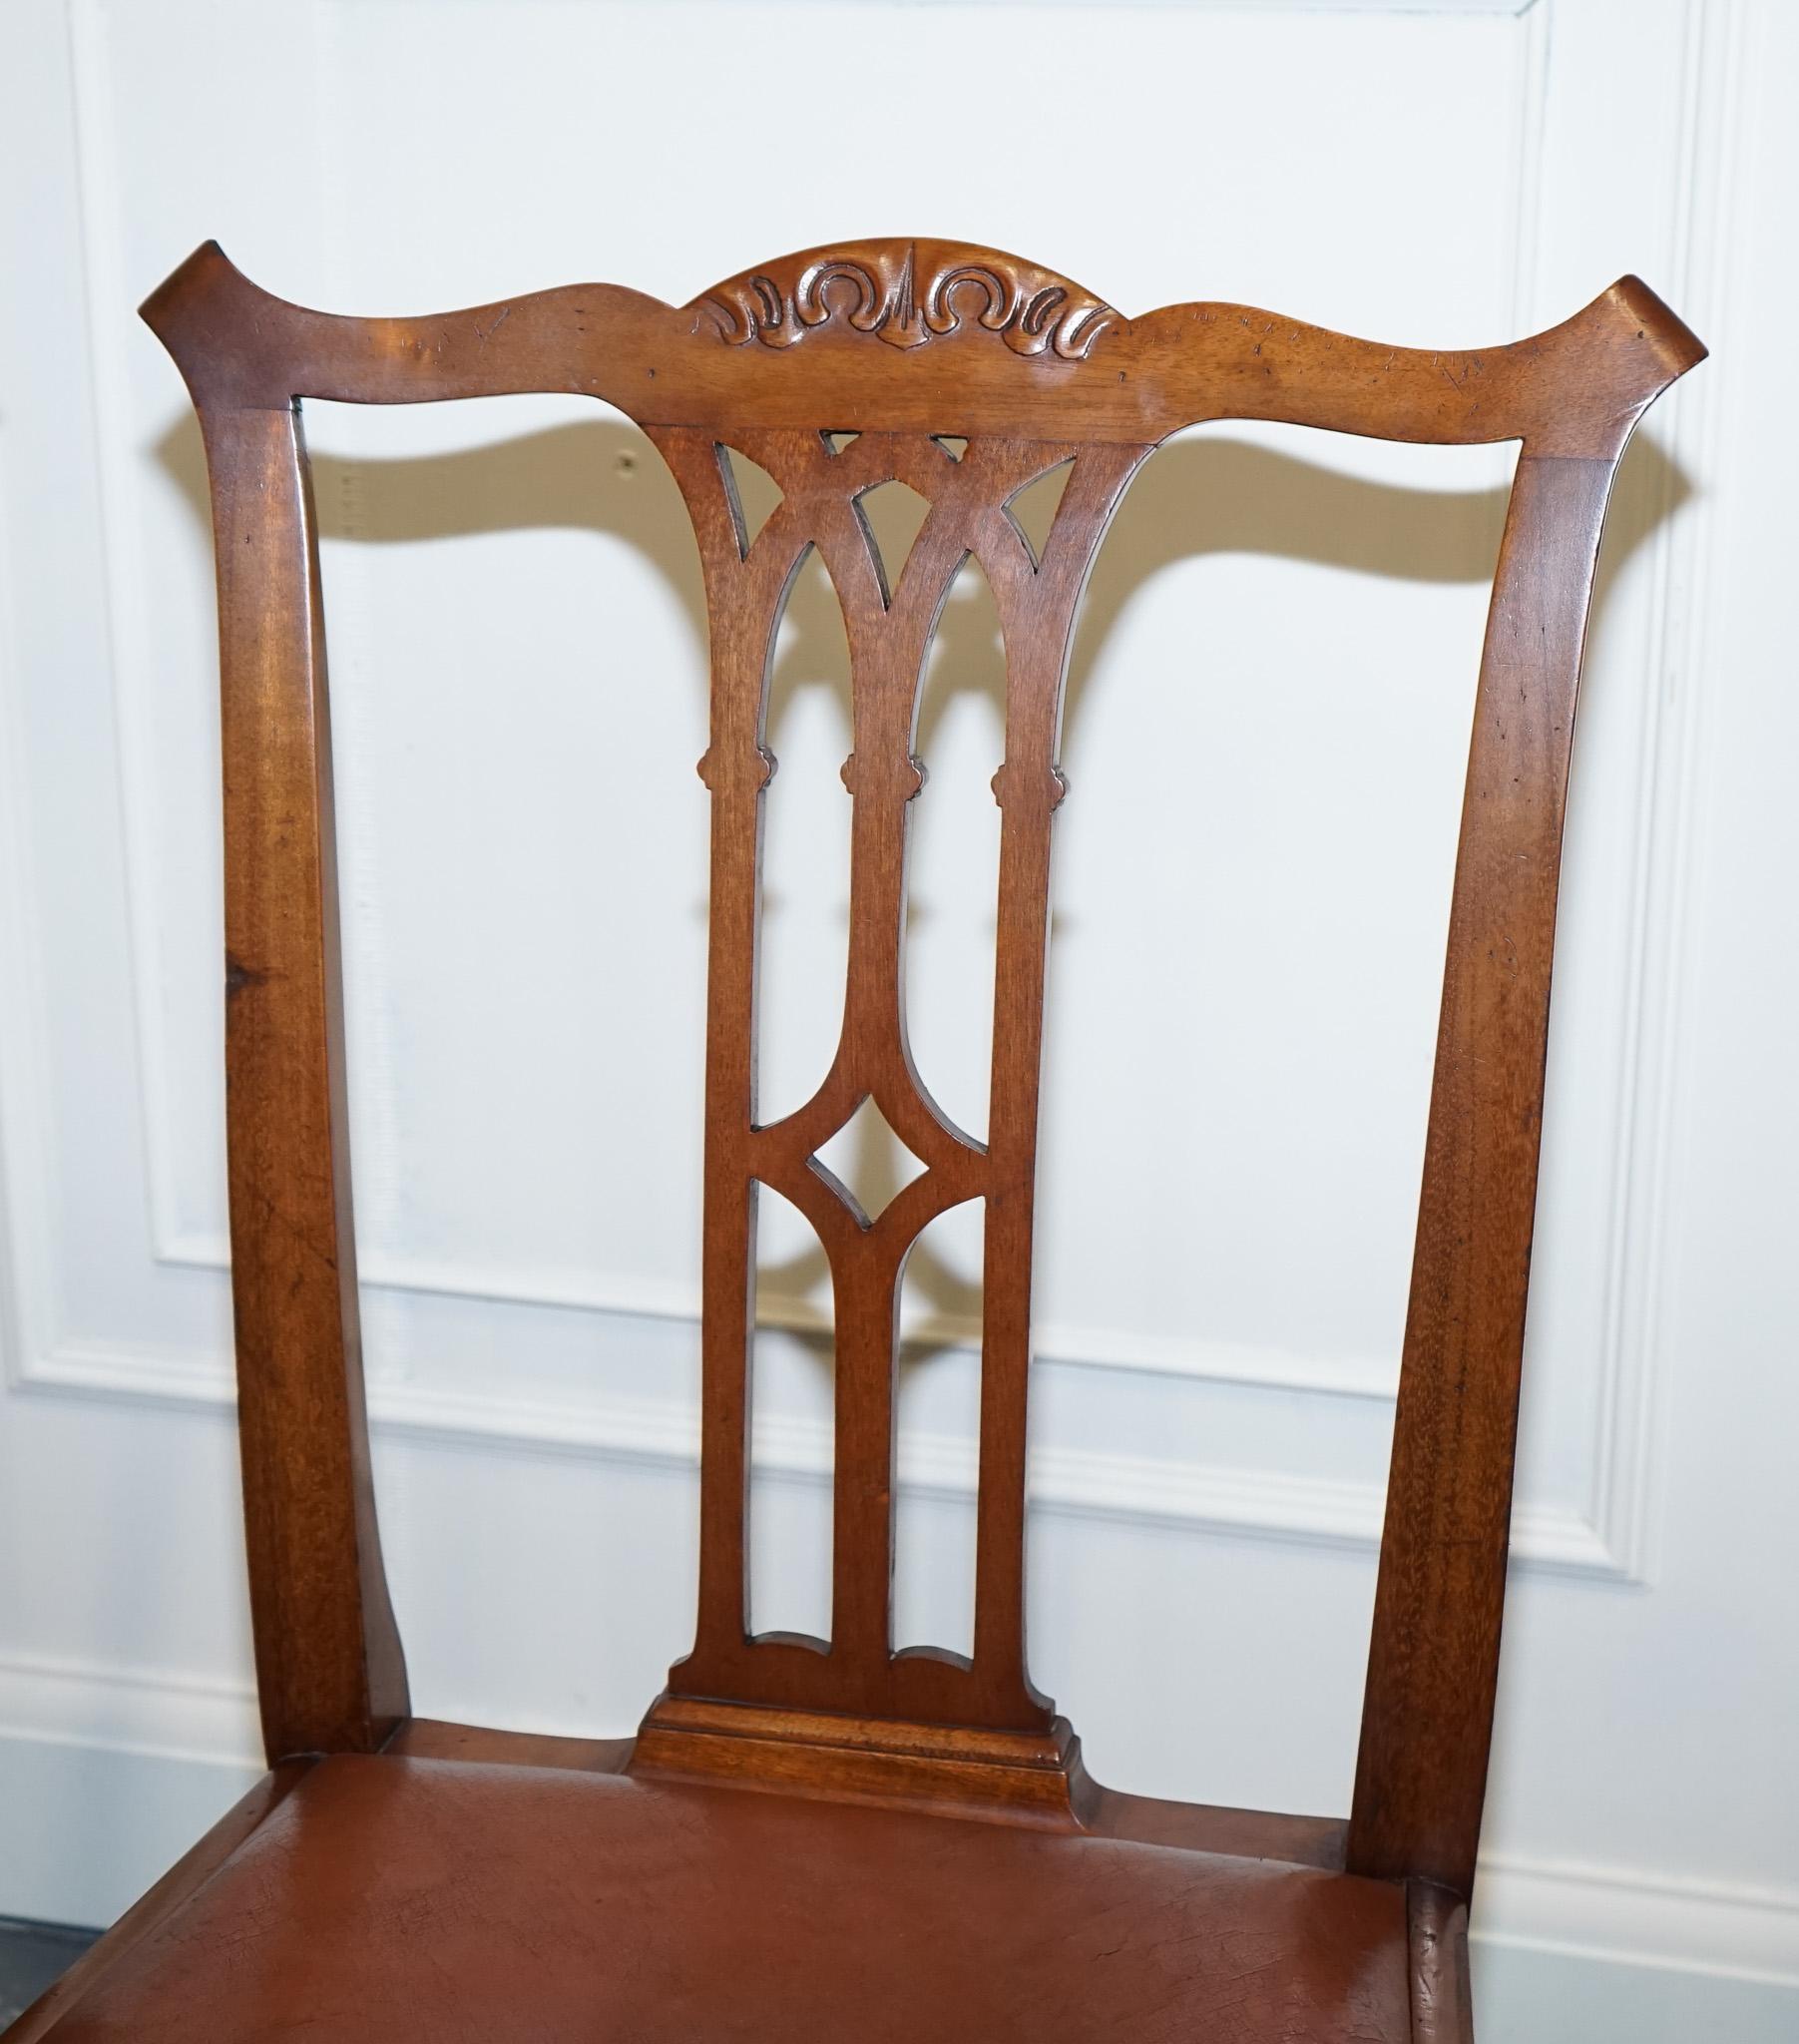 CHIPPENDALE STYLE 5 DINING CHAIRS WiTH LEATHER SEATS PERFECT FOR ROUND TABLE For Sale 10